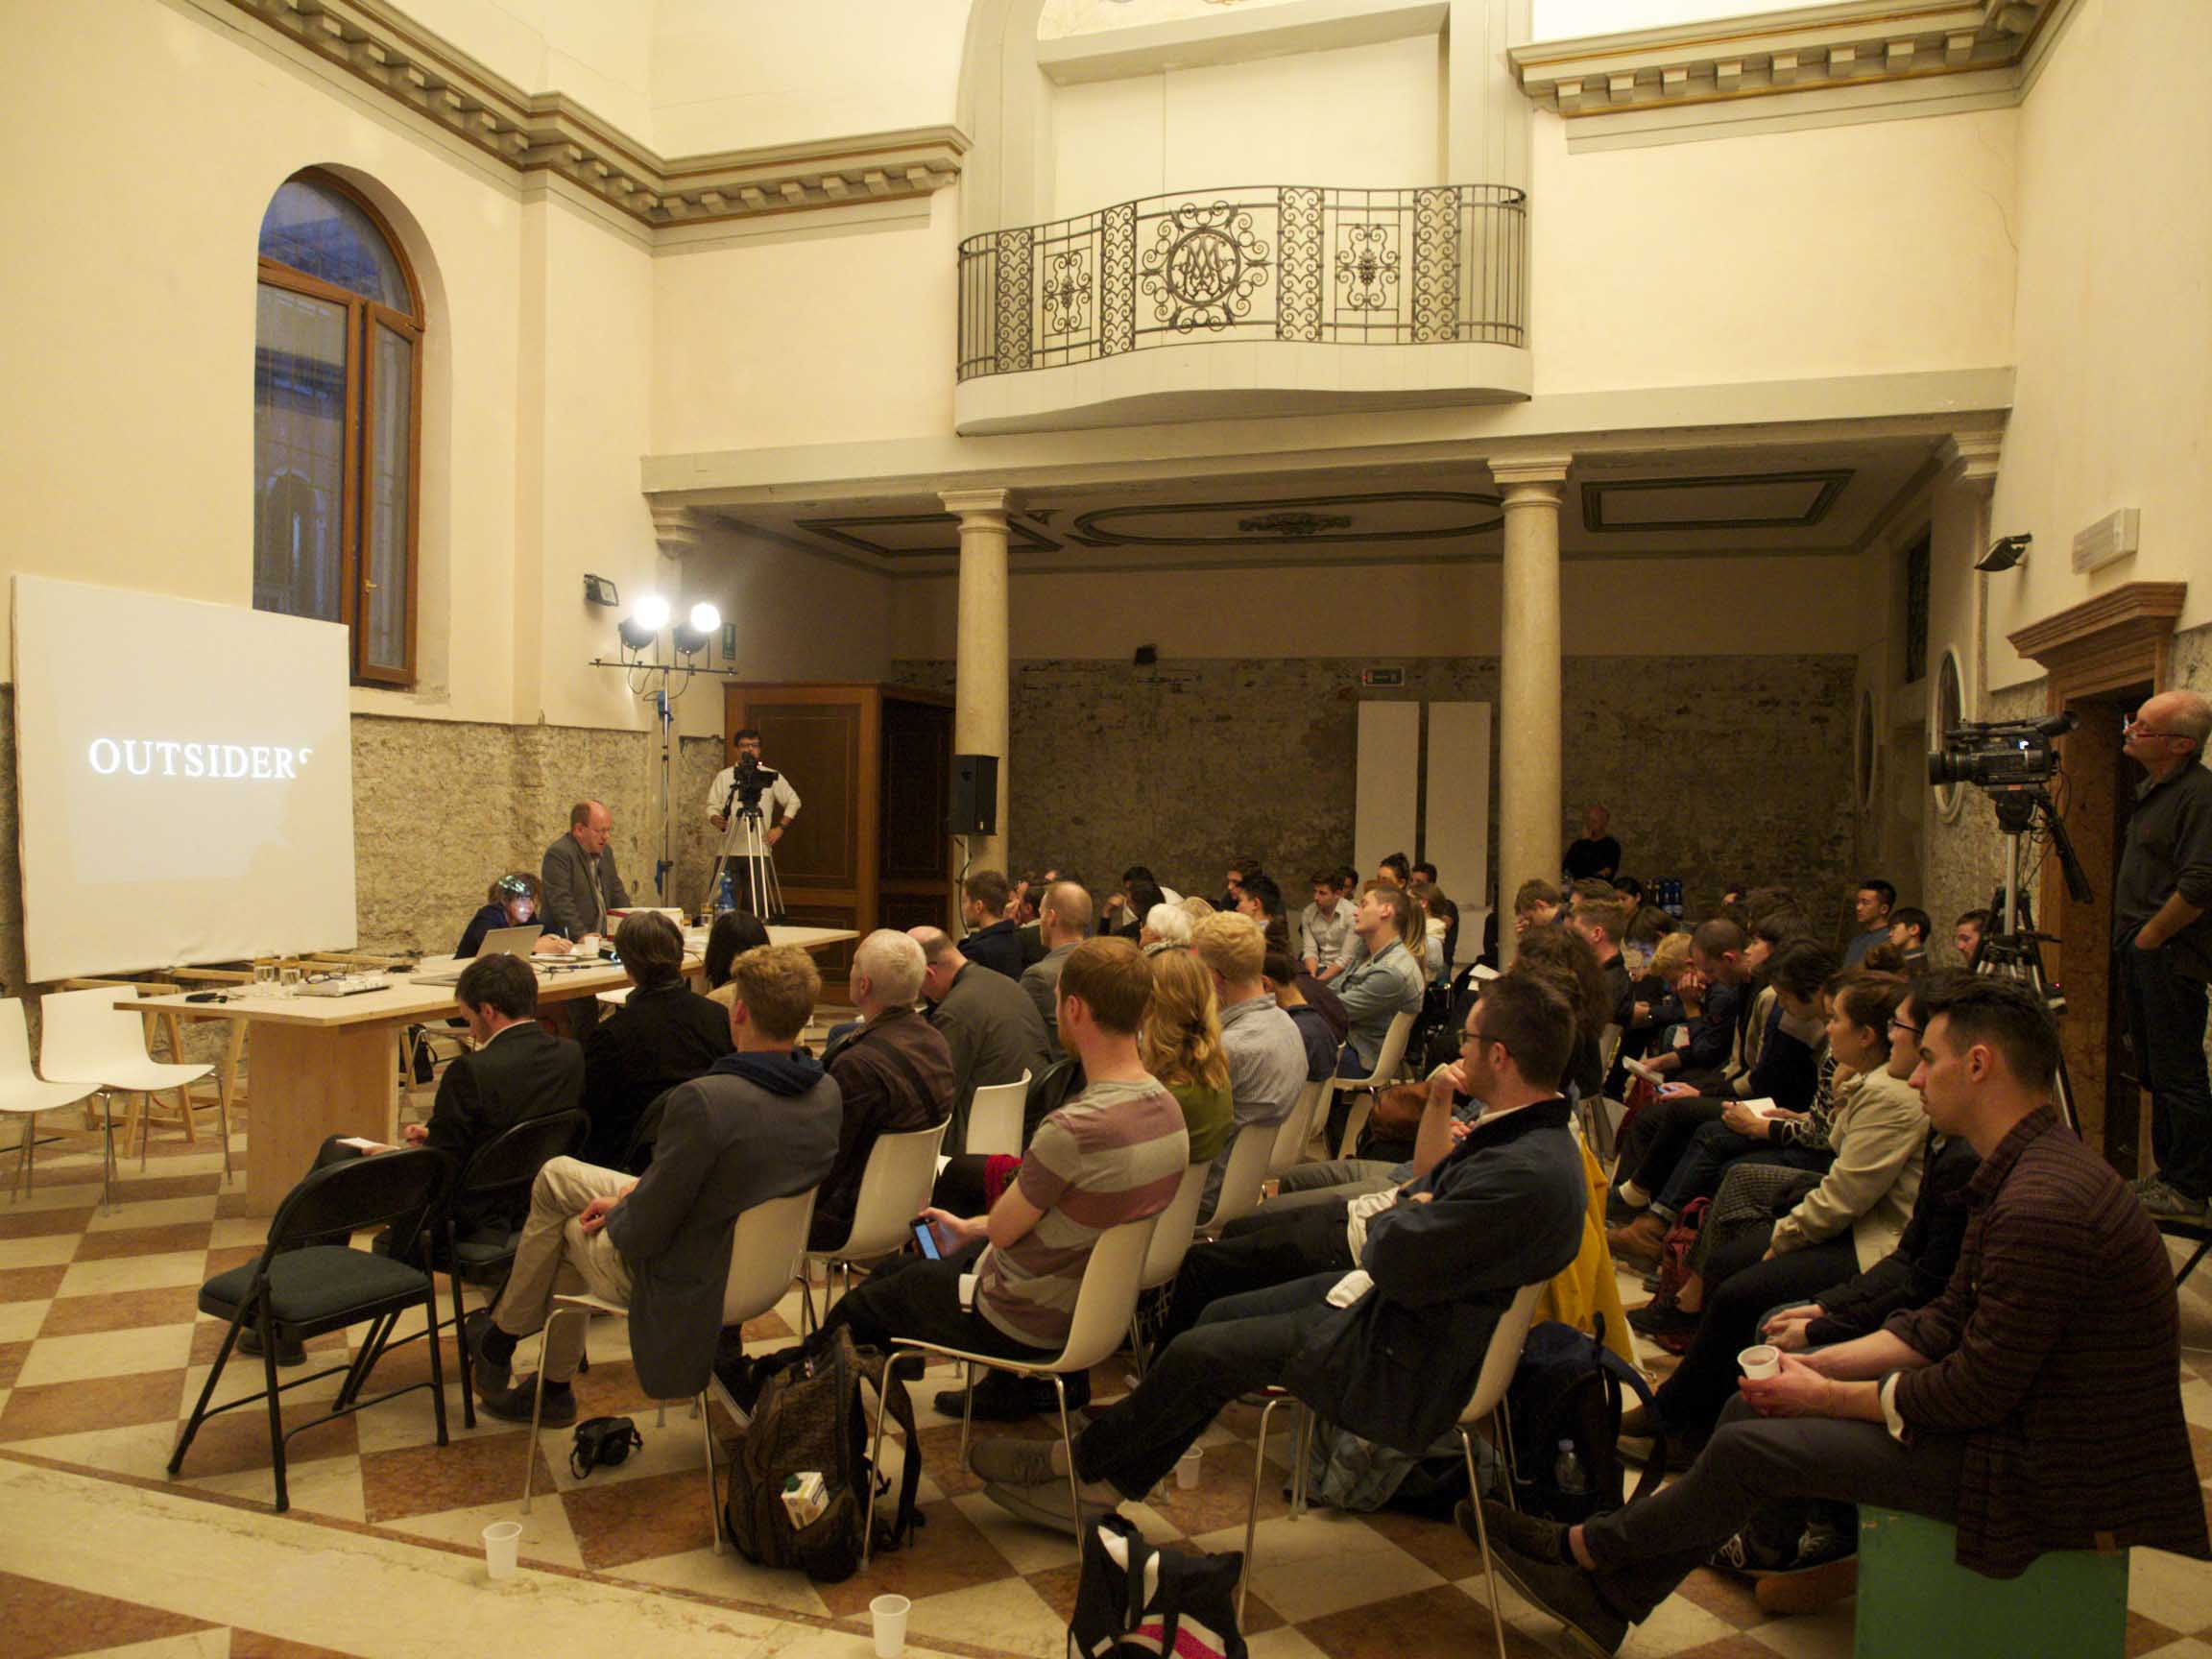 In a large room with two columns and a small balcony, about 50 people are sitting and listening to a presentation. A projector screen displays the word ‘outsider’ in white and all caps.